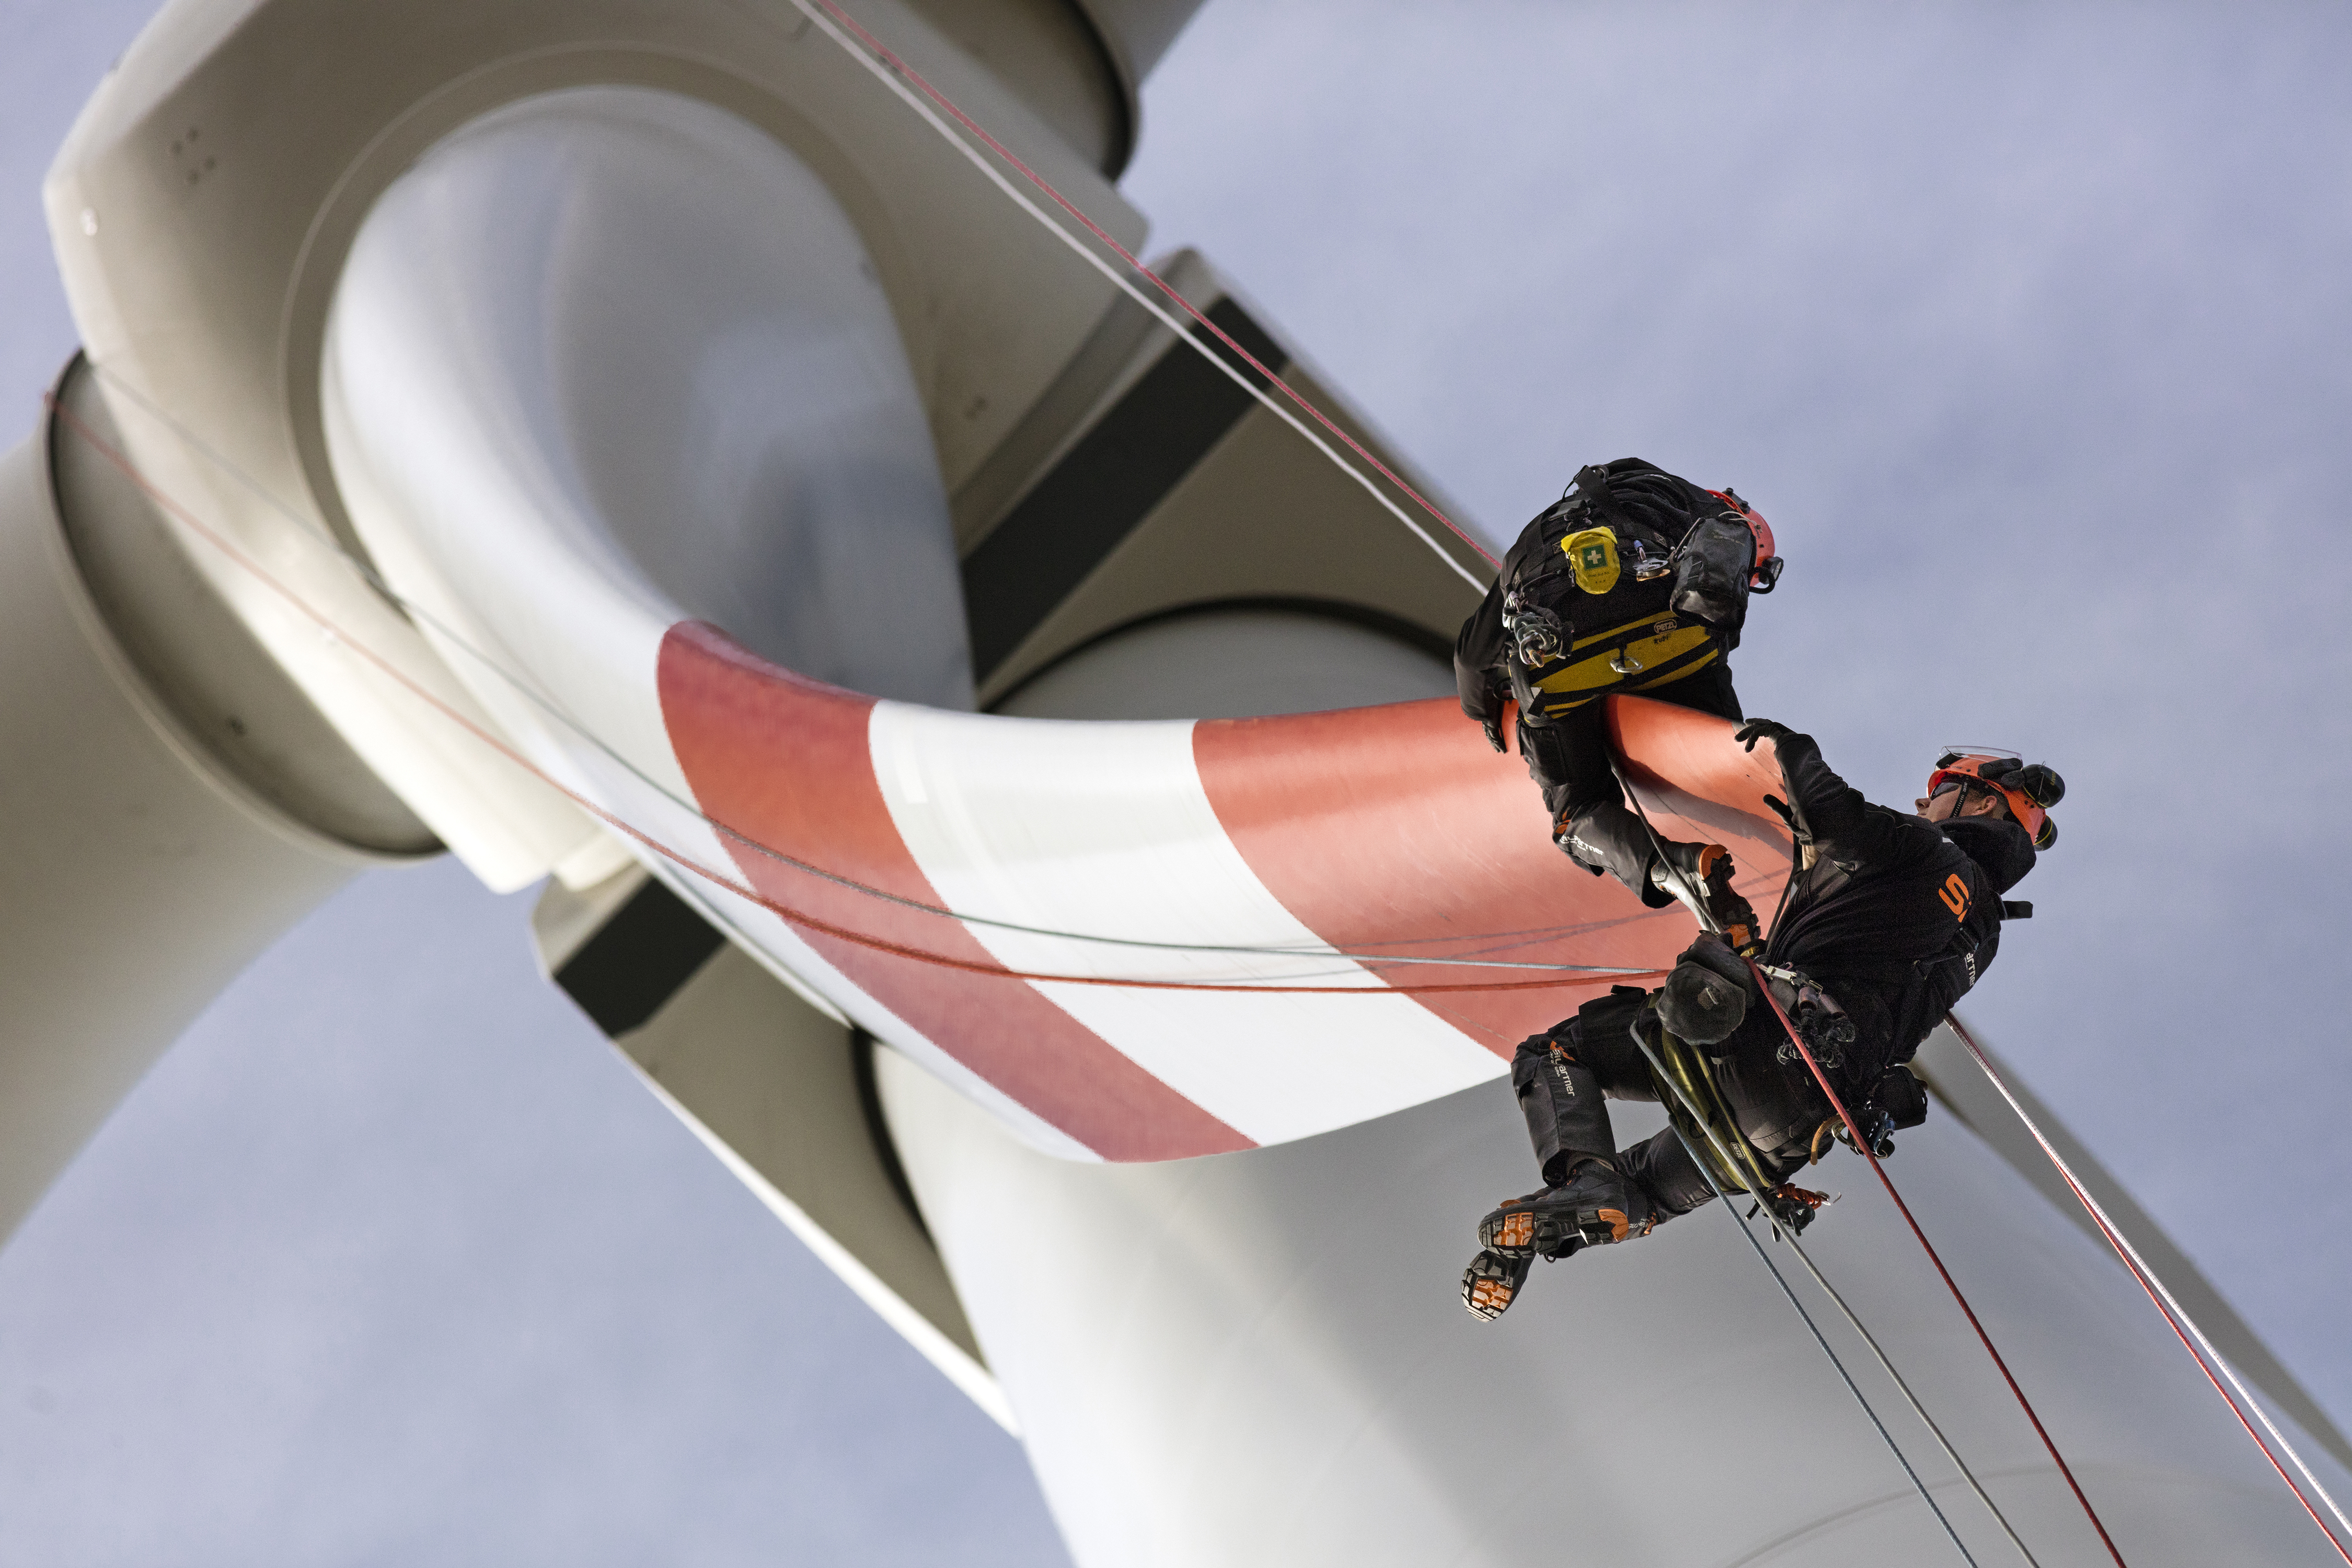 “Like spidermen two windfarm technicians working with ropes, routinely checking blades of a windturbine high above and free from giddiness. Lindenberg near Berlin, Brandenburg, Federal Republic of Germany. 23rd of March 2017.”